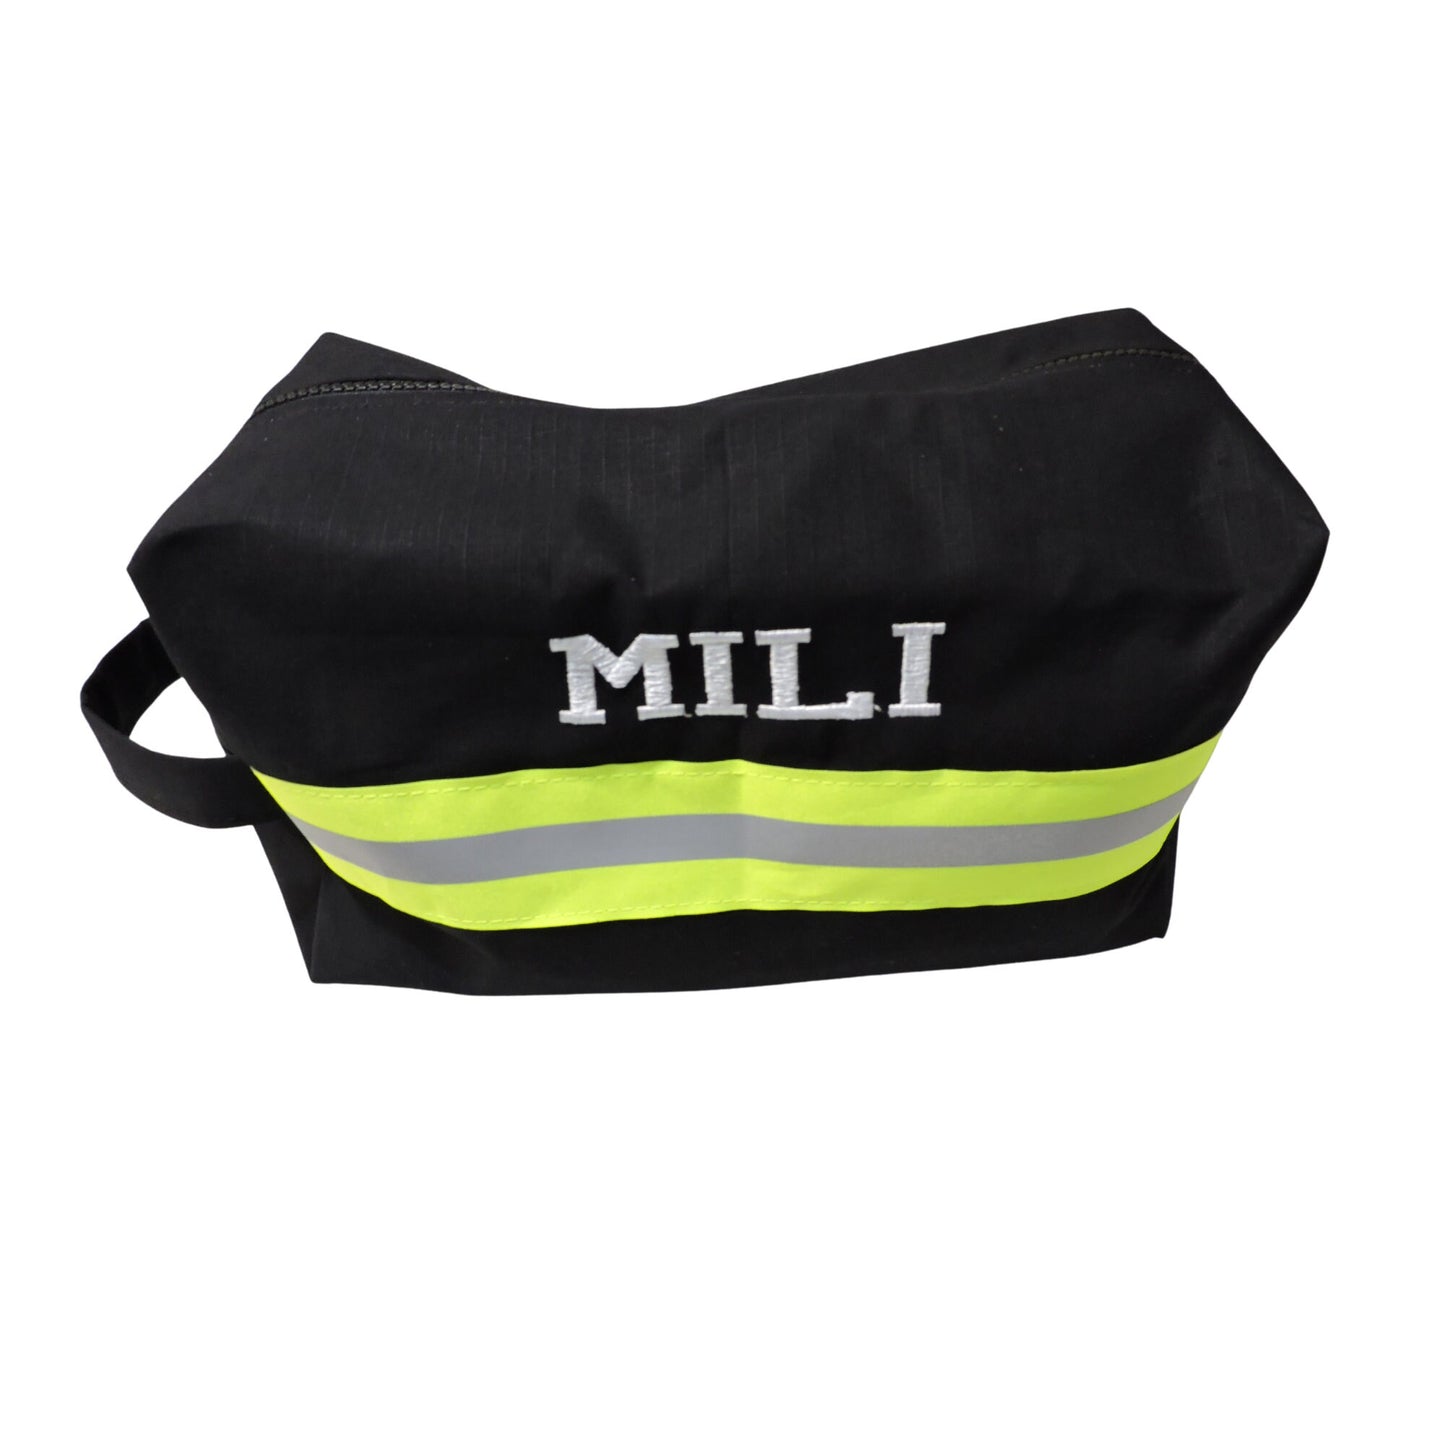 Black firefighter toiletry bag with a name added 